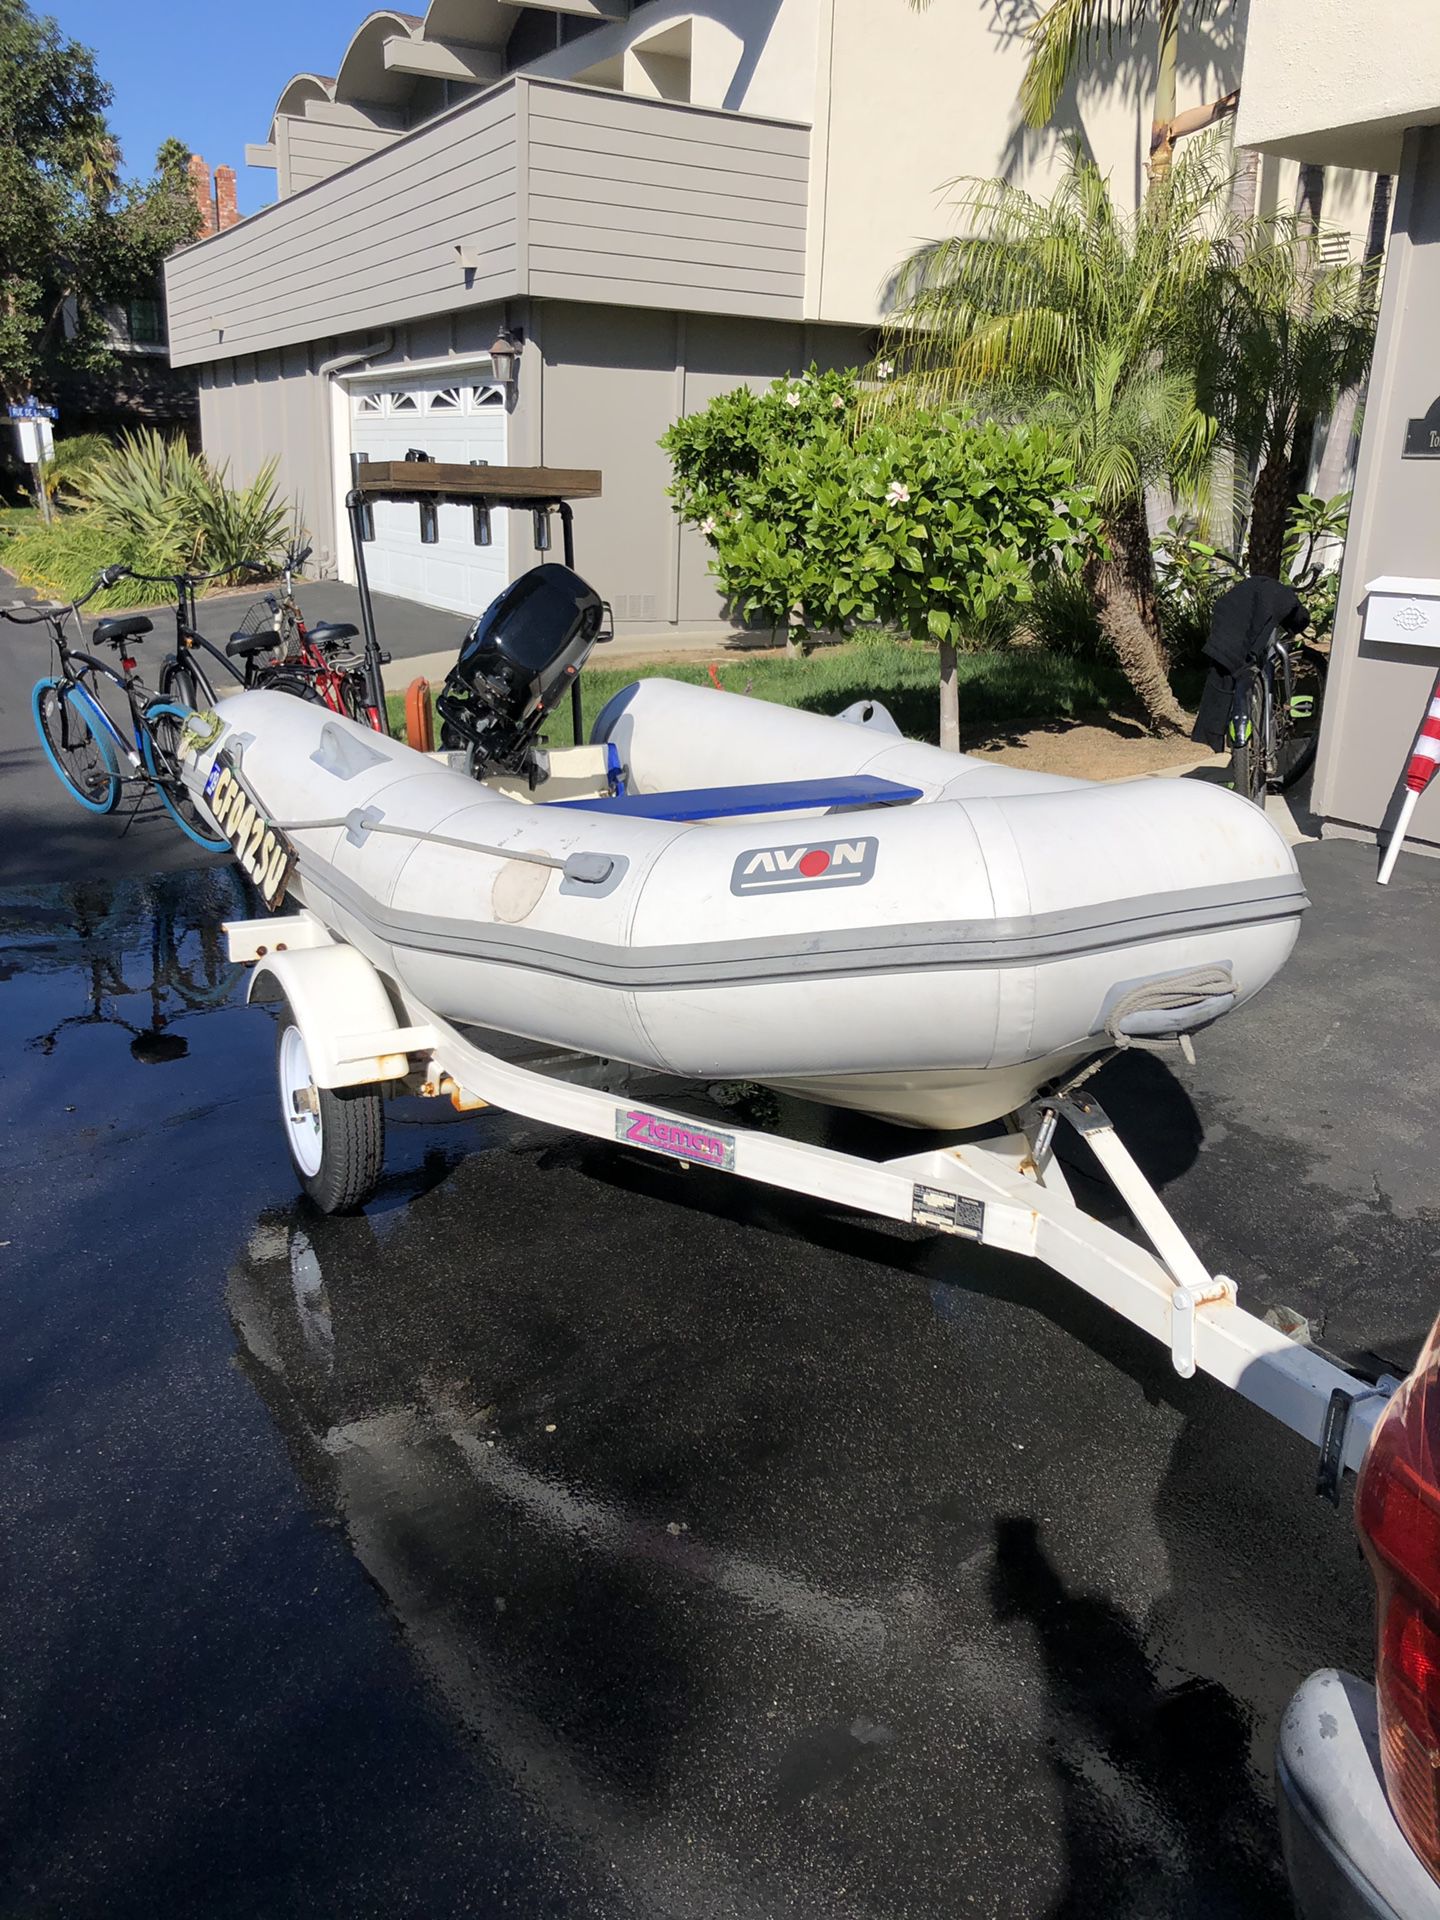 11’ Boat with Trailer For Sale